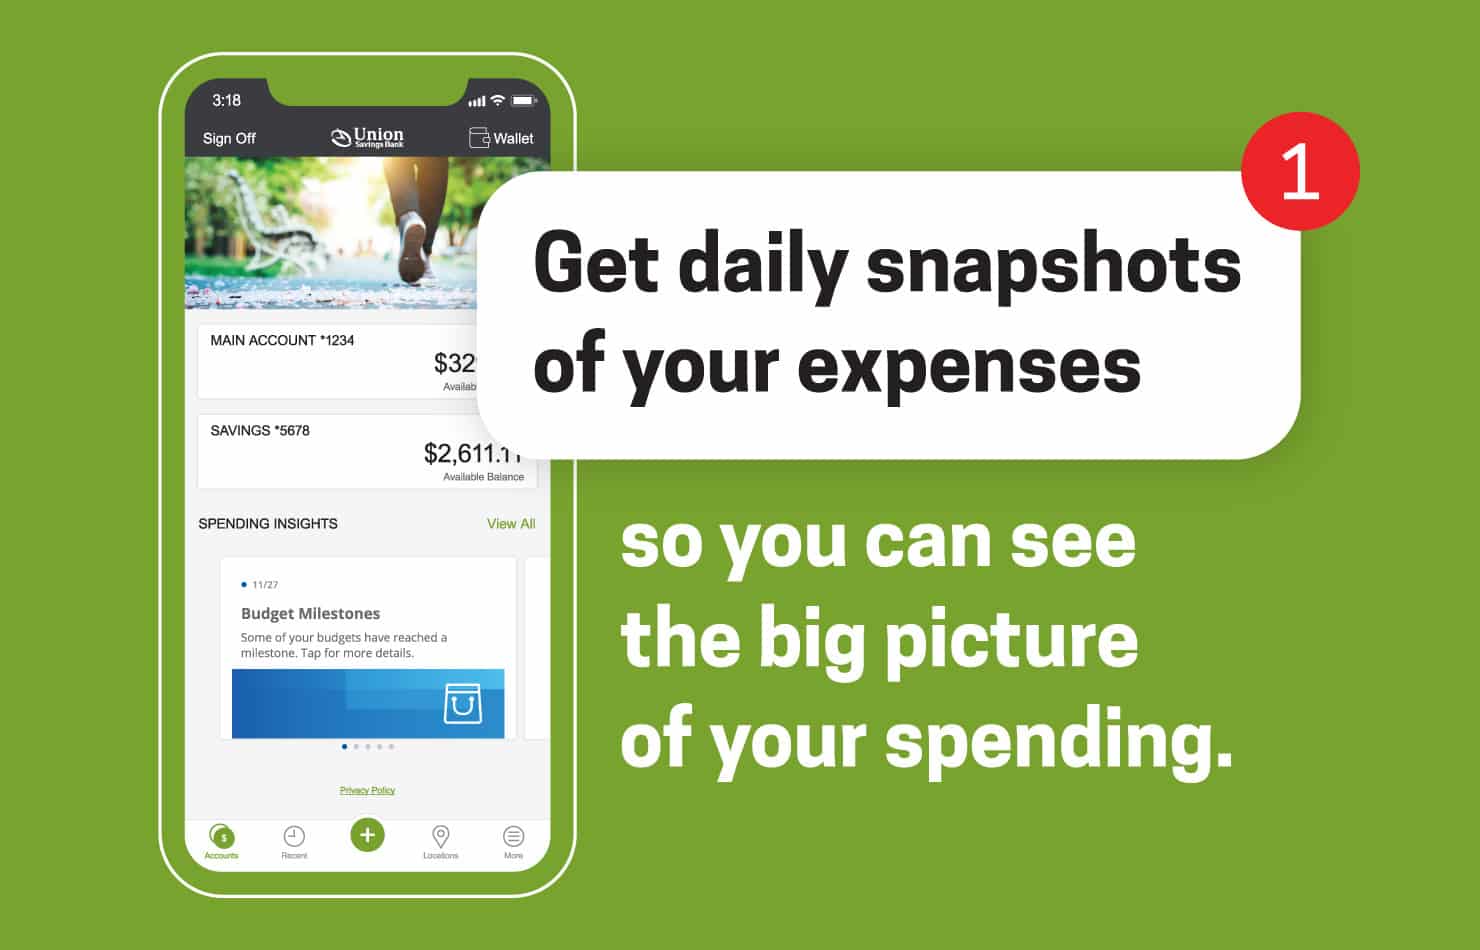 Get daily snapshots of your expenses